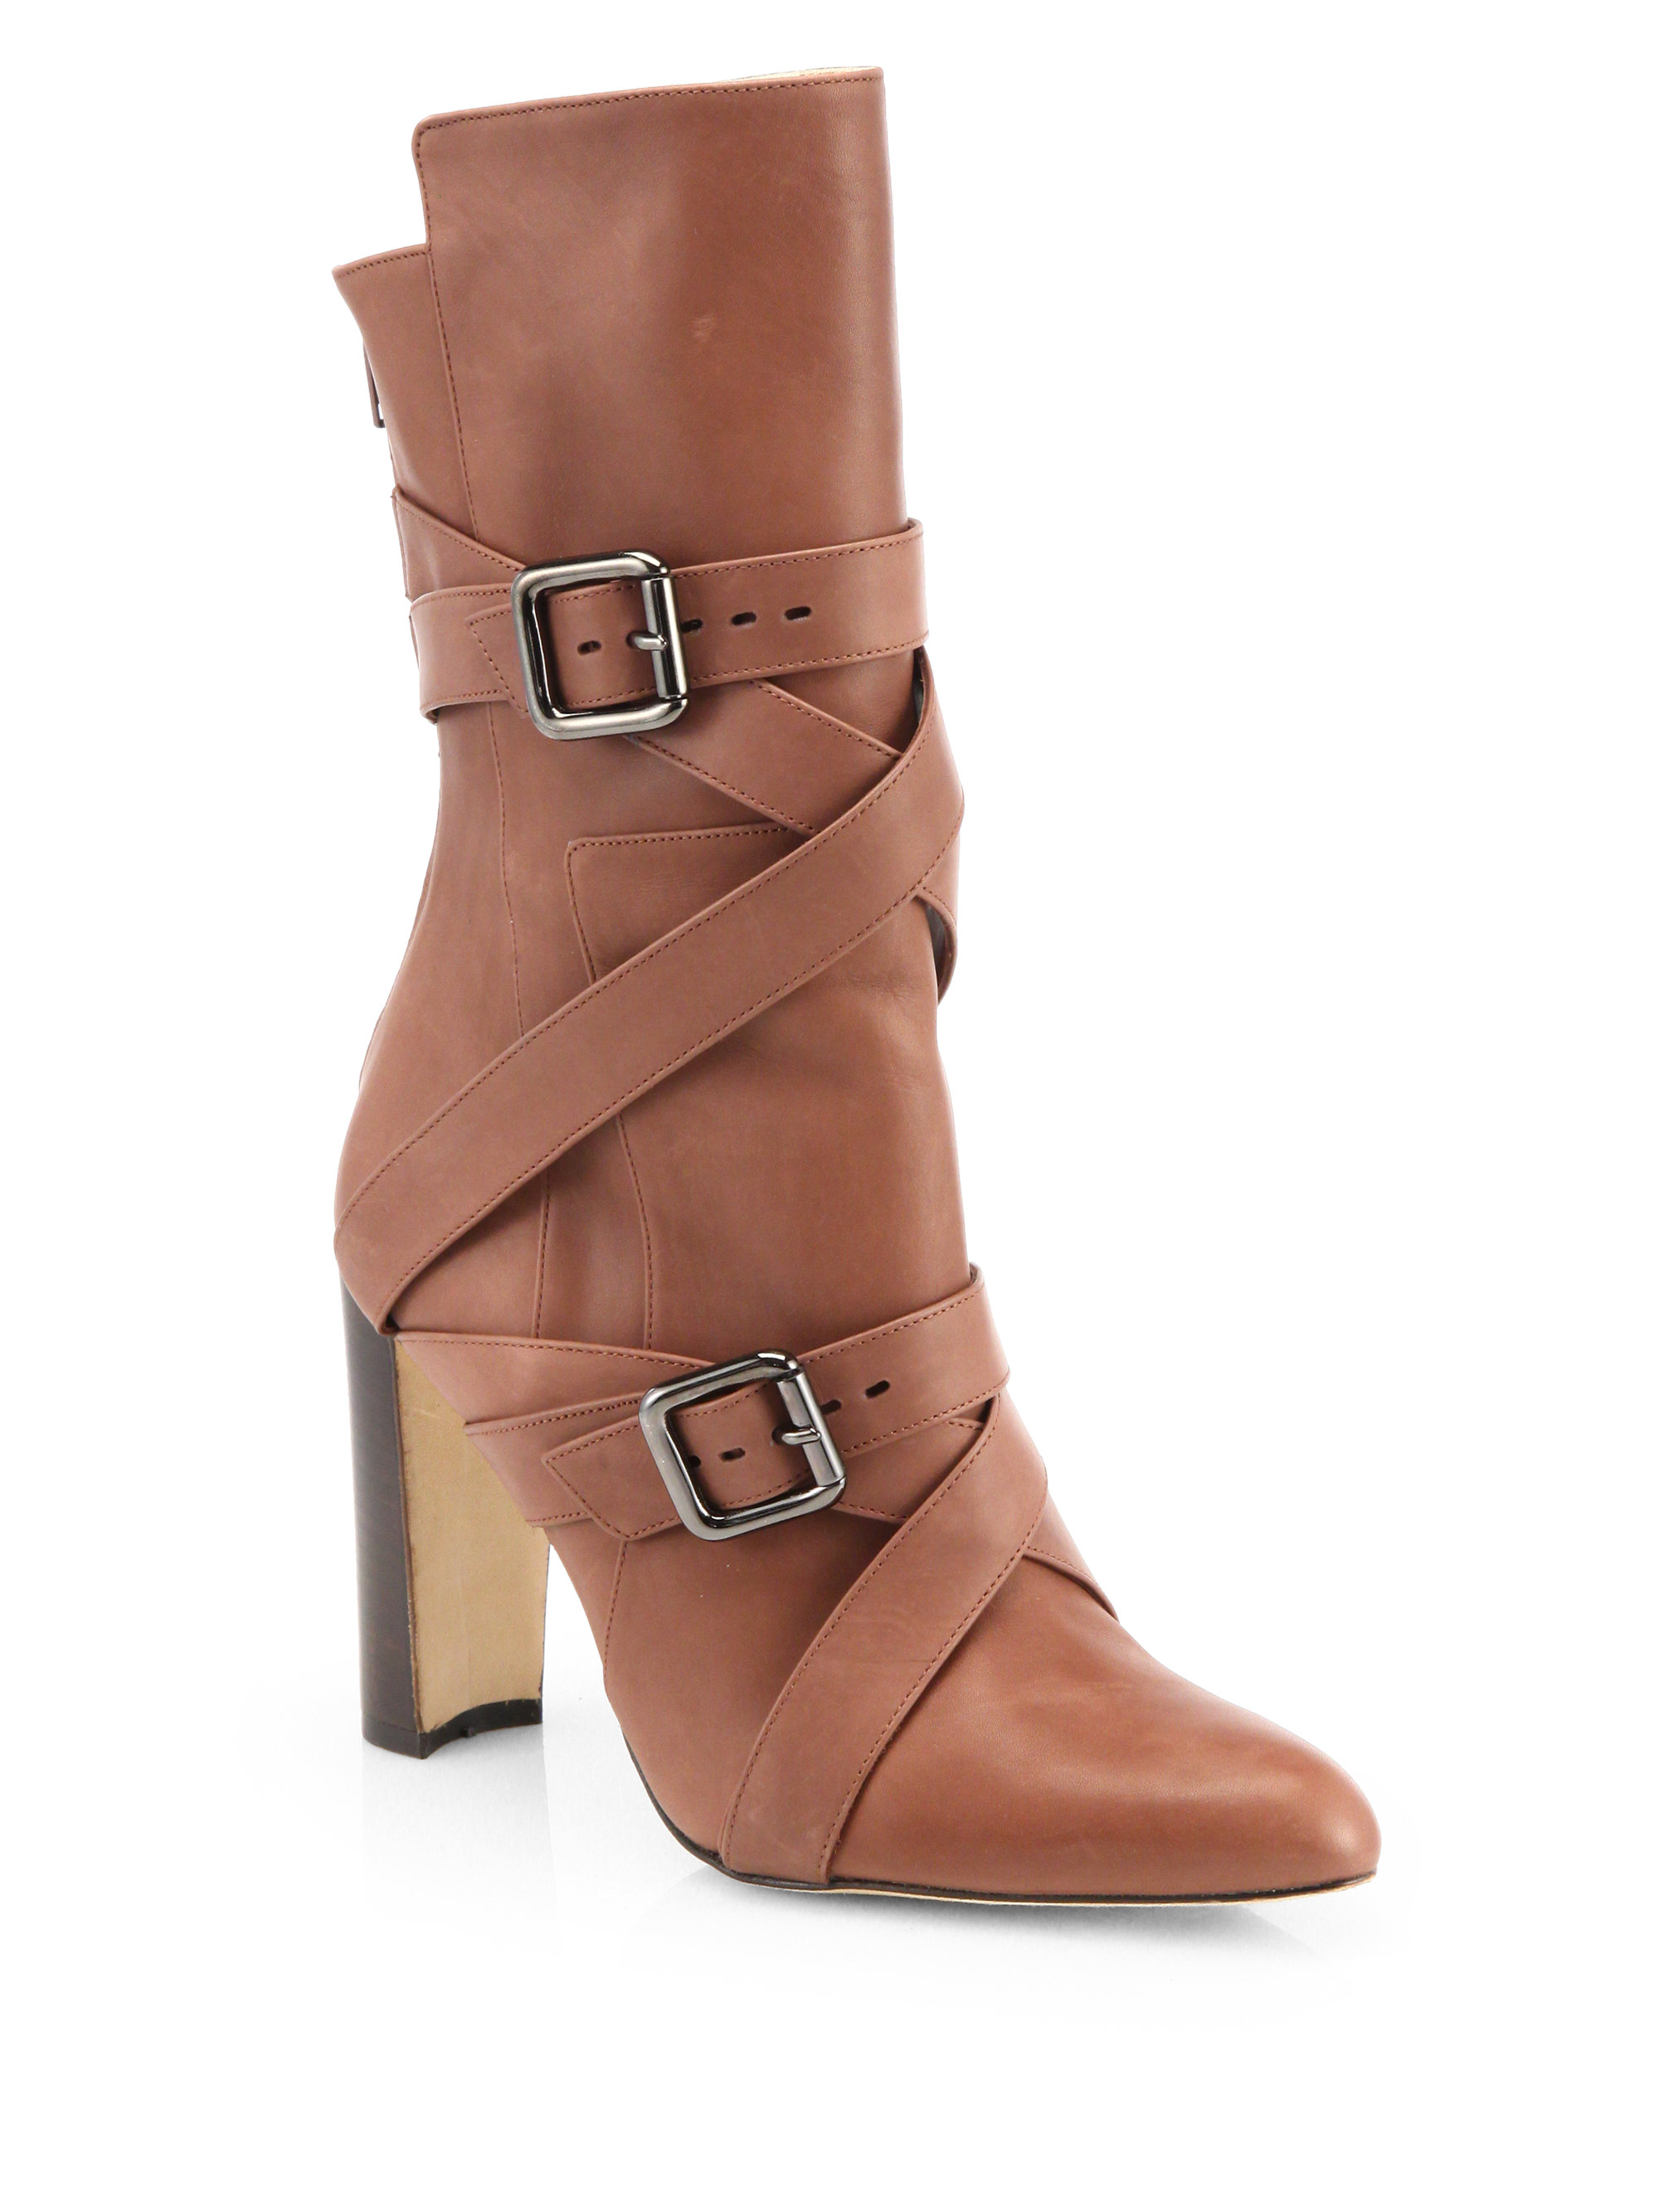 Manolo blahnik Strappy Leather Mid-Calf Boots in Brown | Lyst